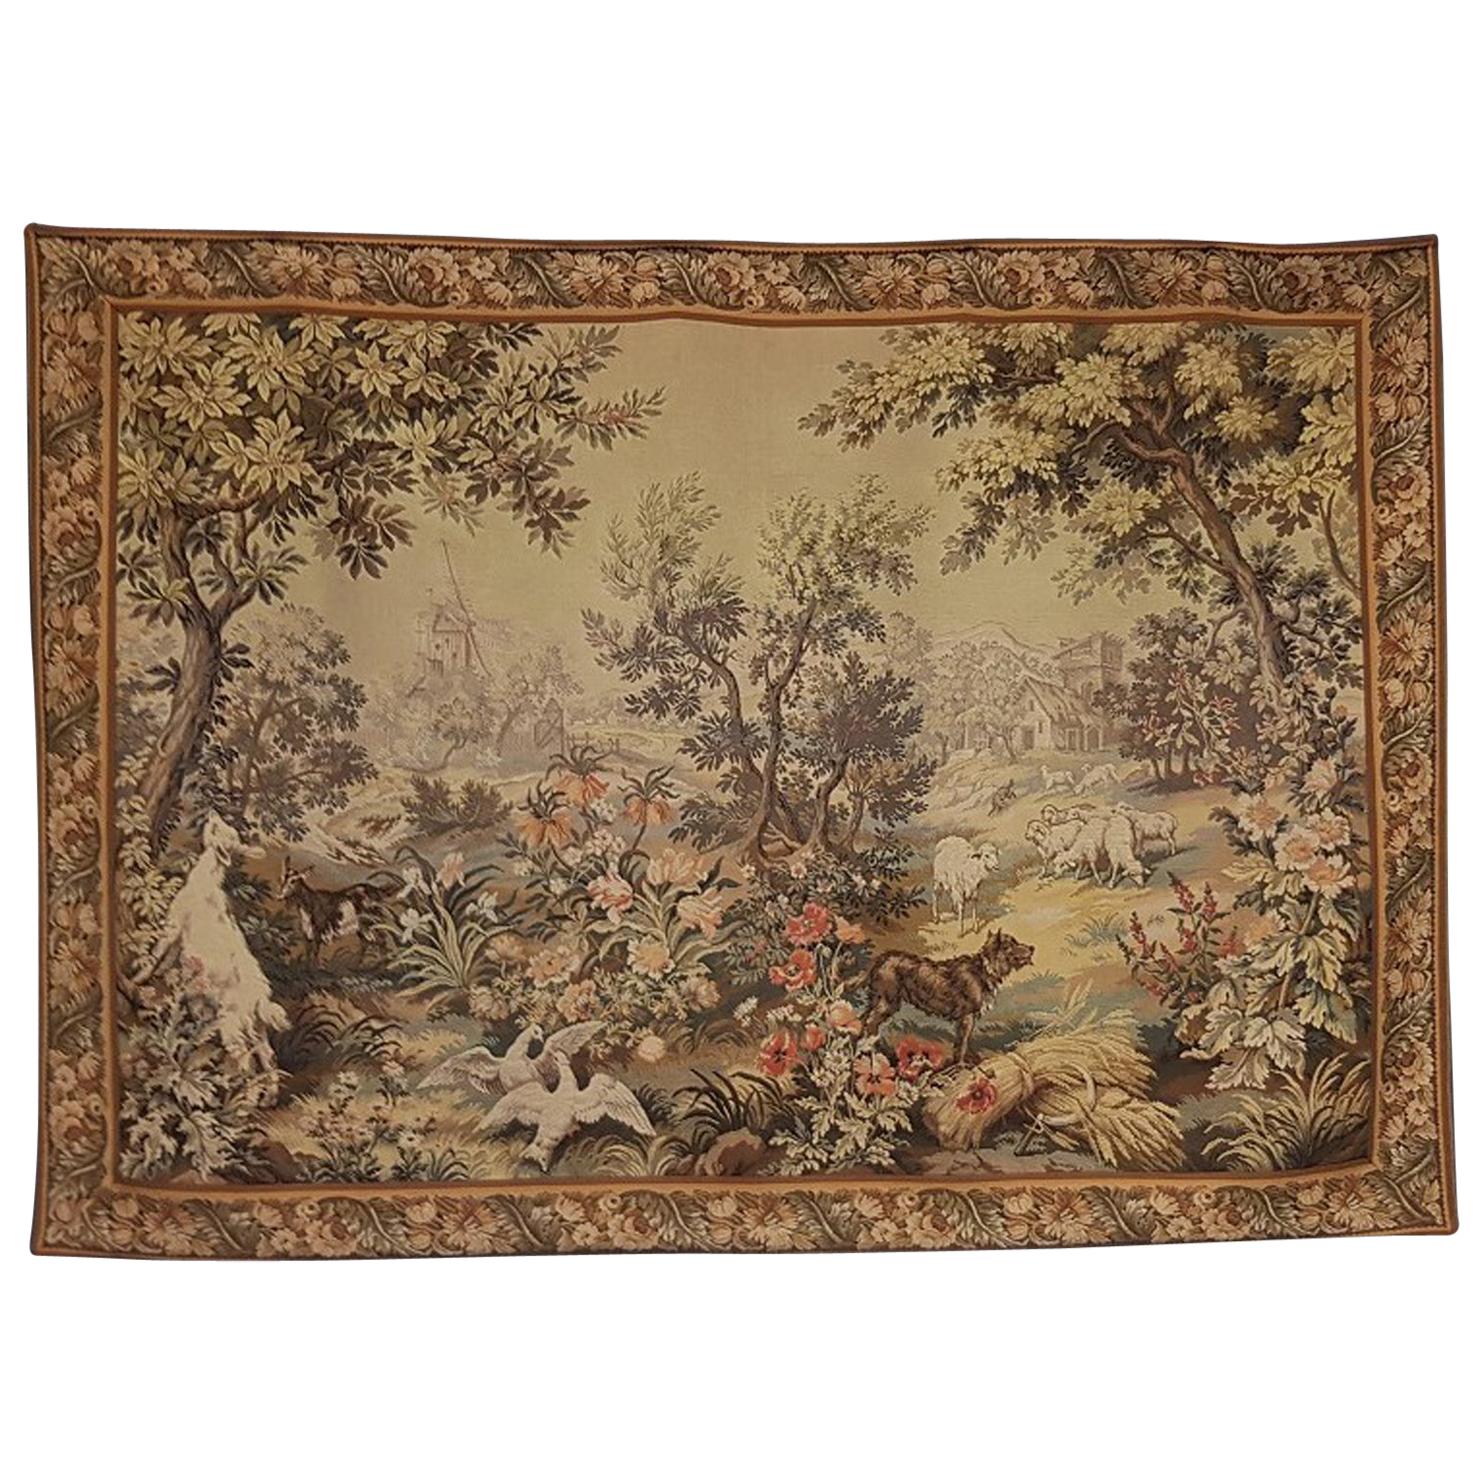 Beautiful Large Tapestry Rug Carpet, France, 19th Century